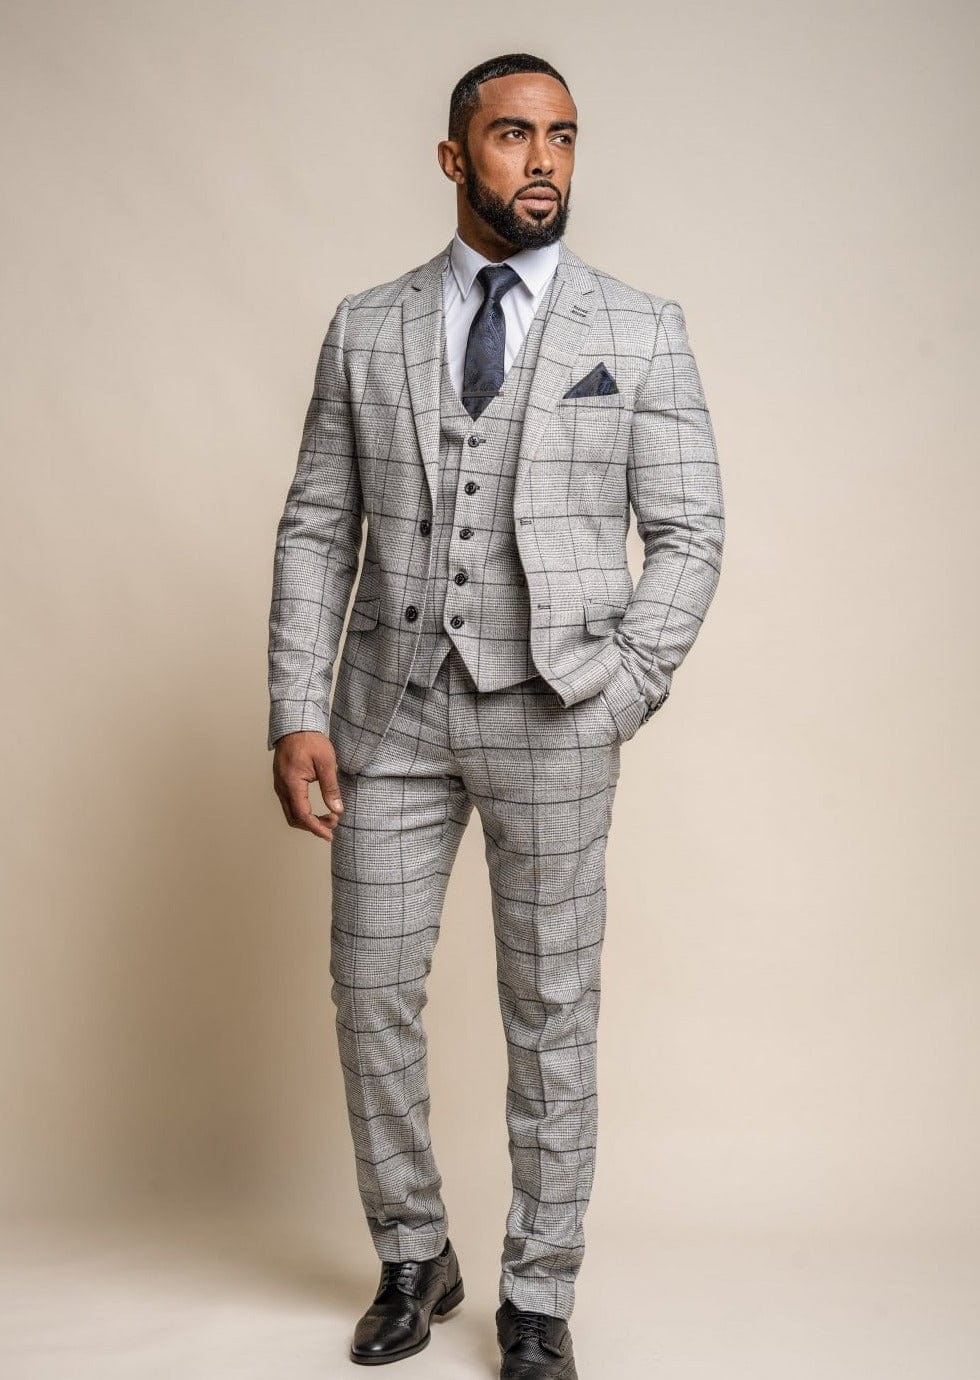 Julian Craker Savile Row London Prince of Wales check three piece suit 42 R  - Simpson Advanced Chiropractic & Medical Center